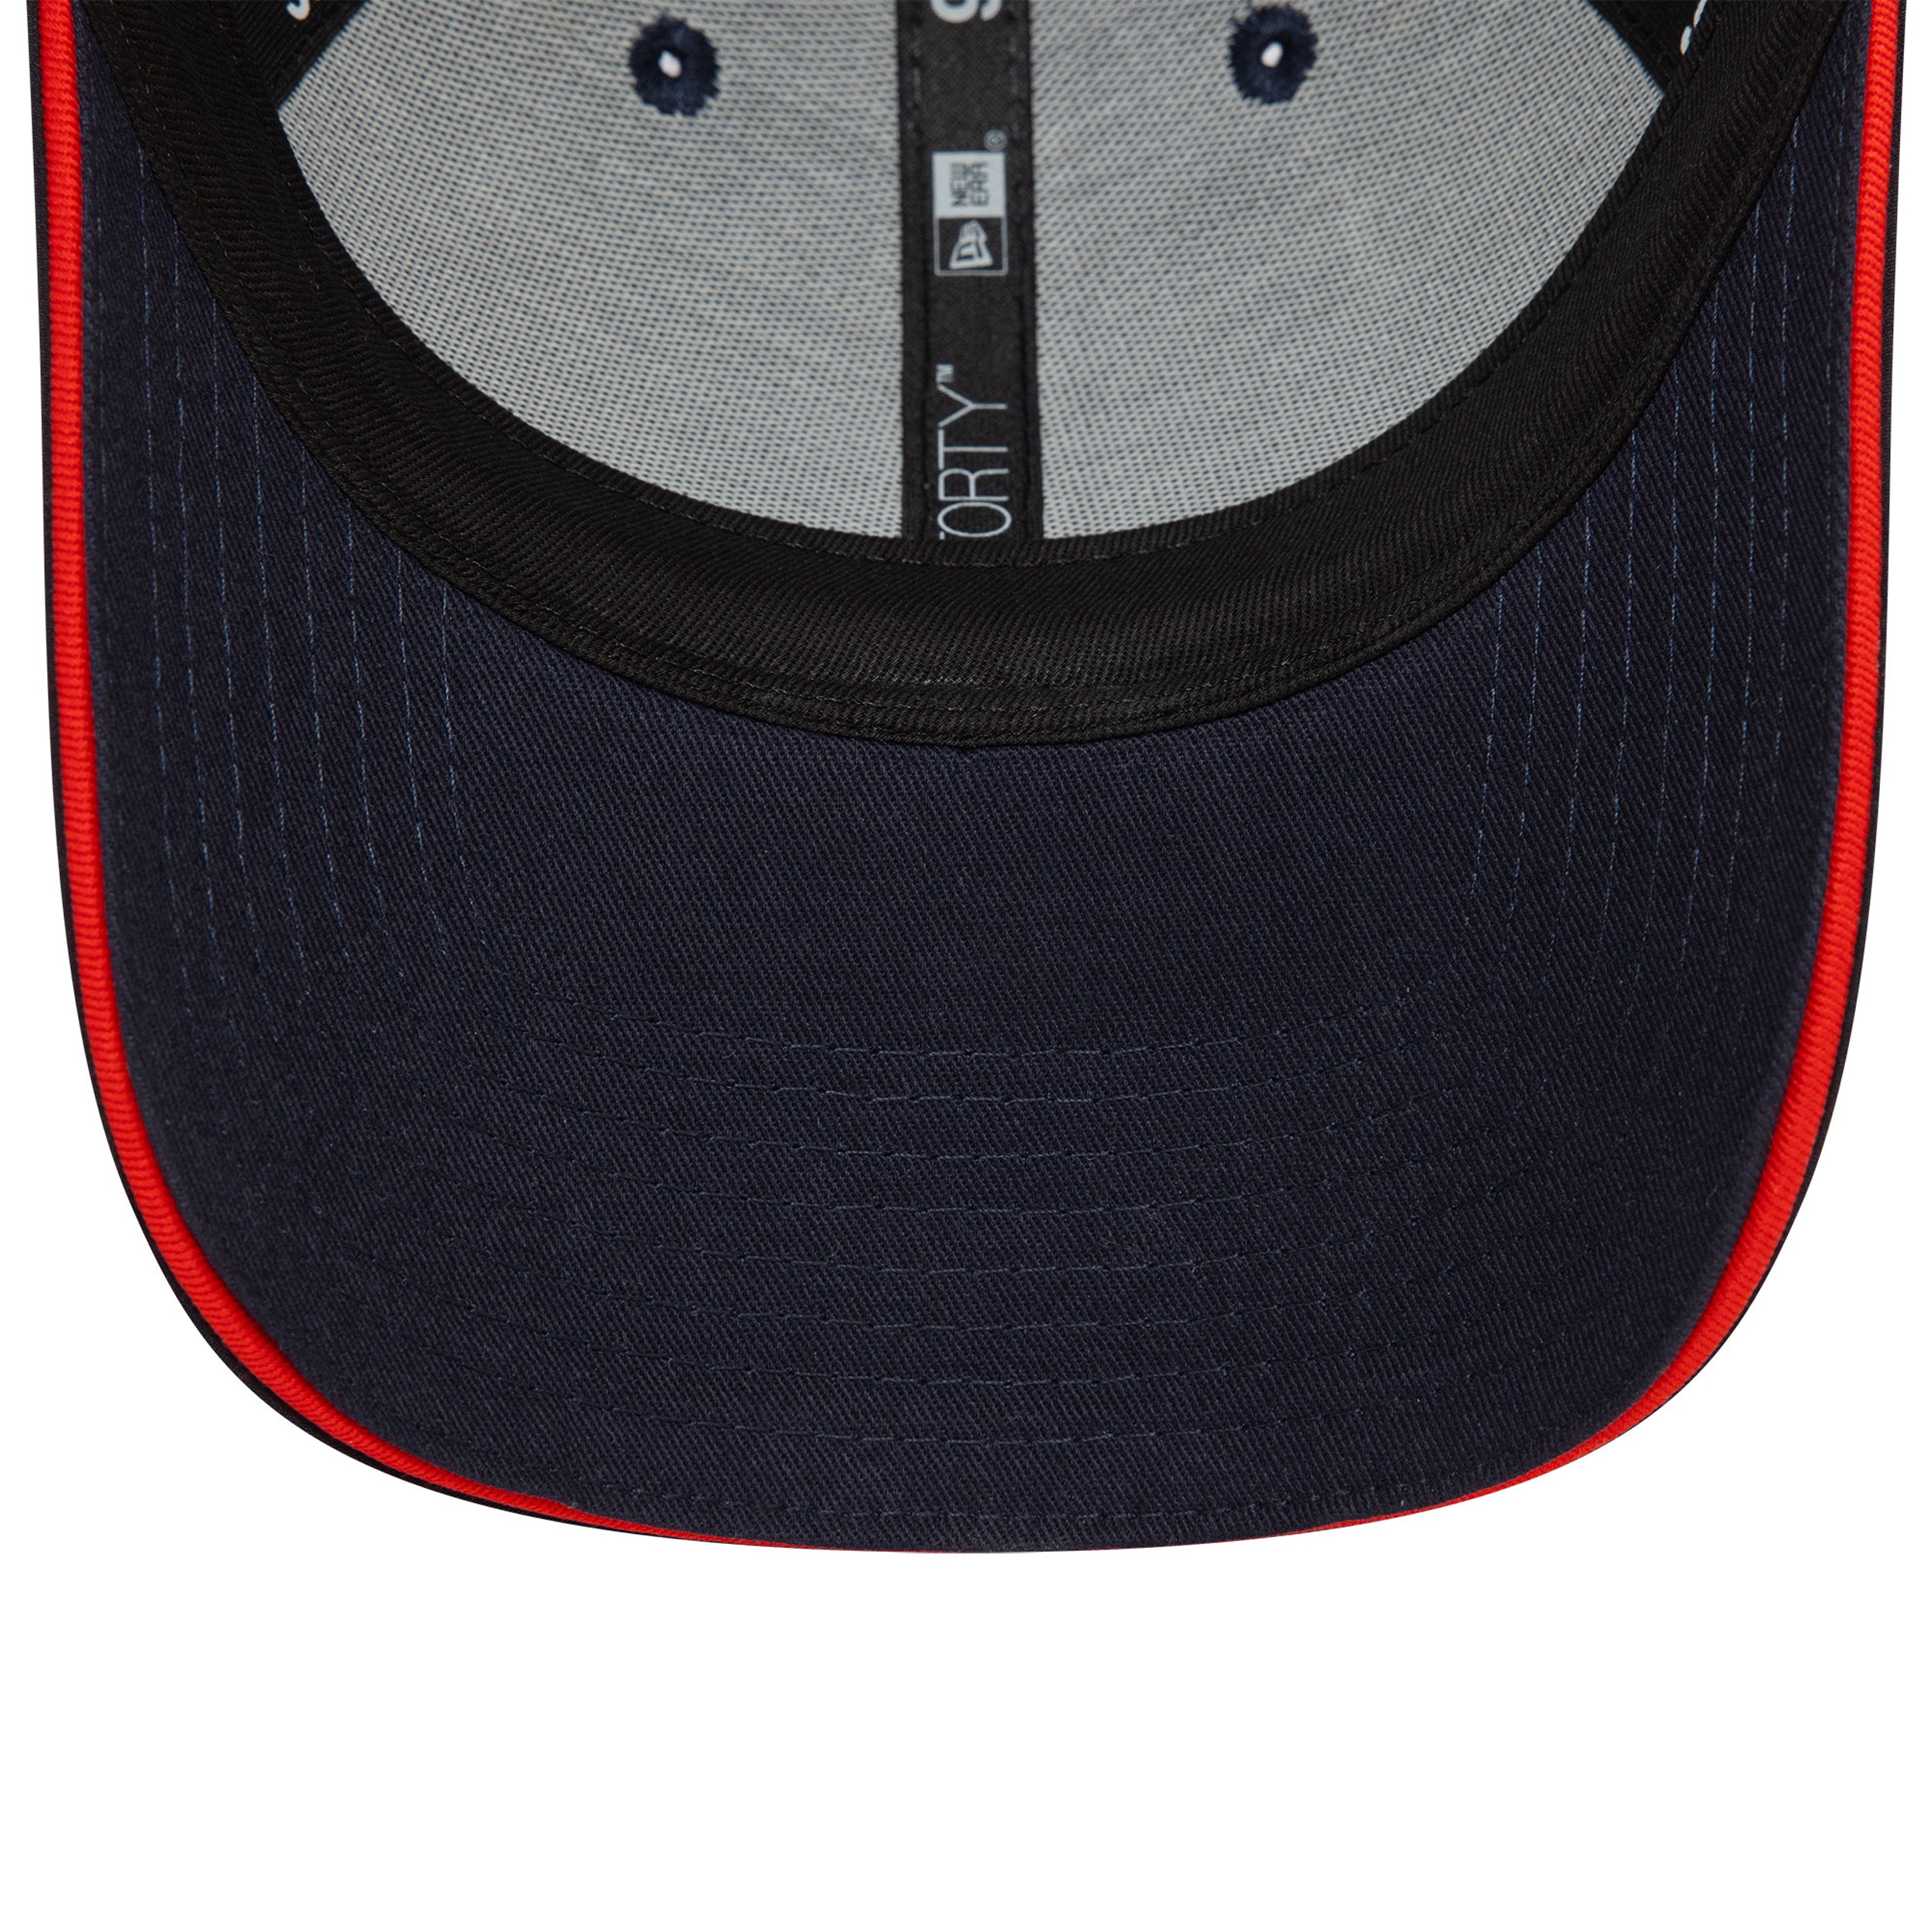 Cappellino 9FORTY Red Bull Racing Team Blu Navy - 60504664